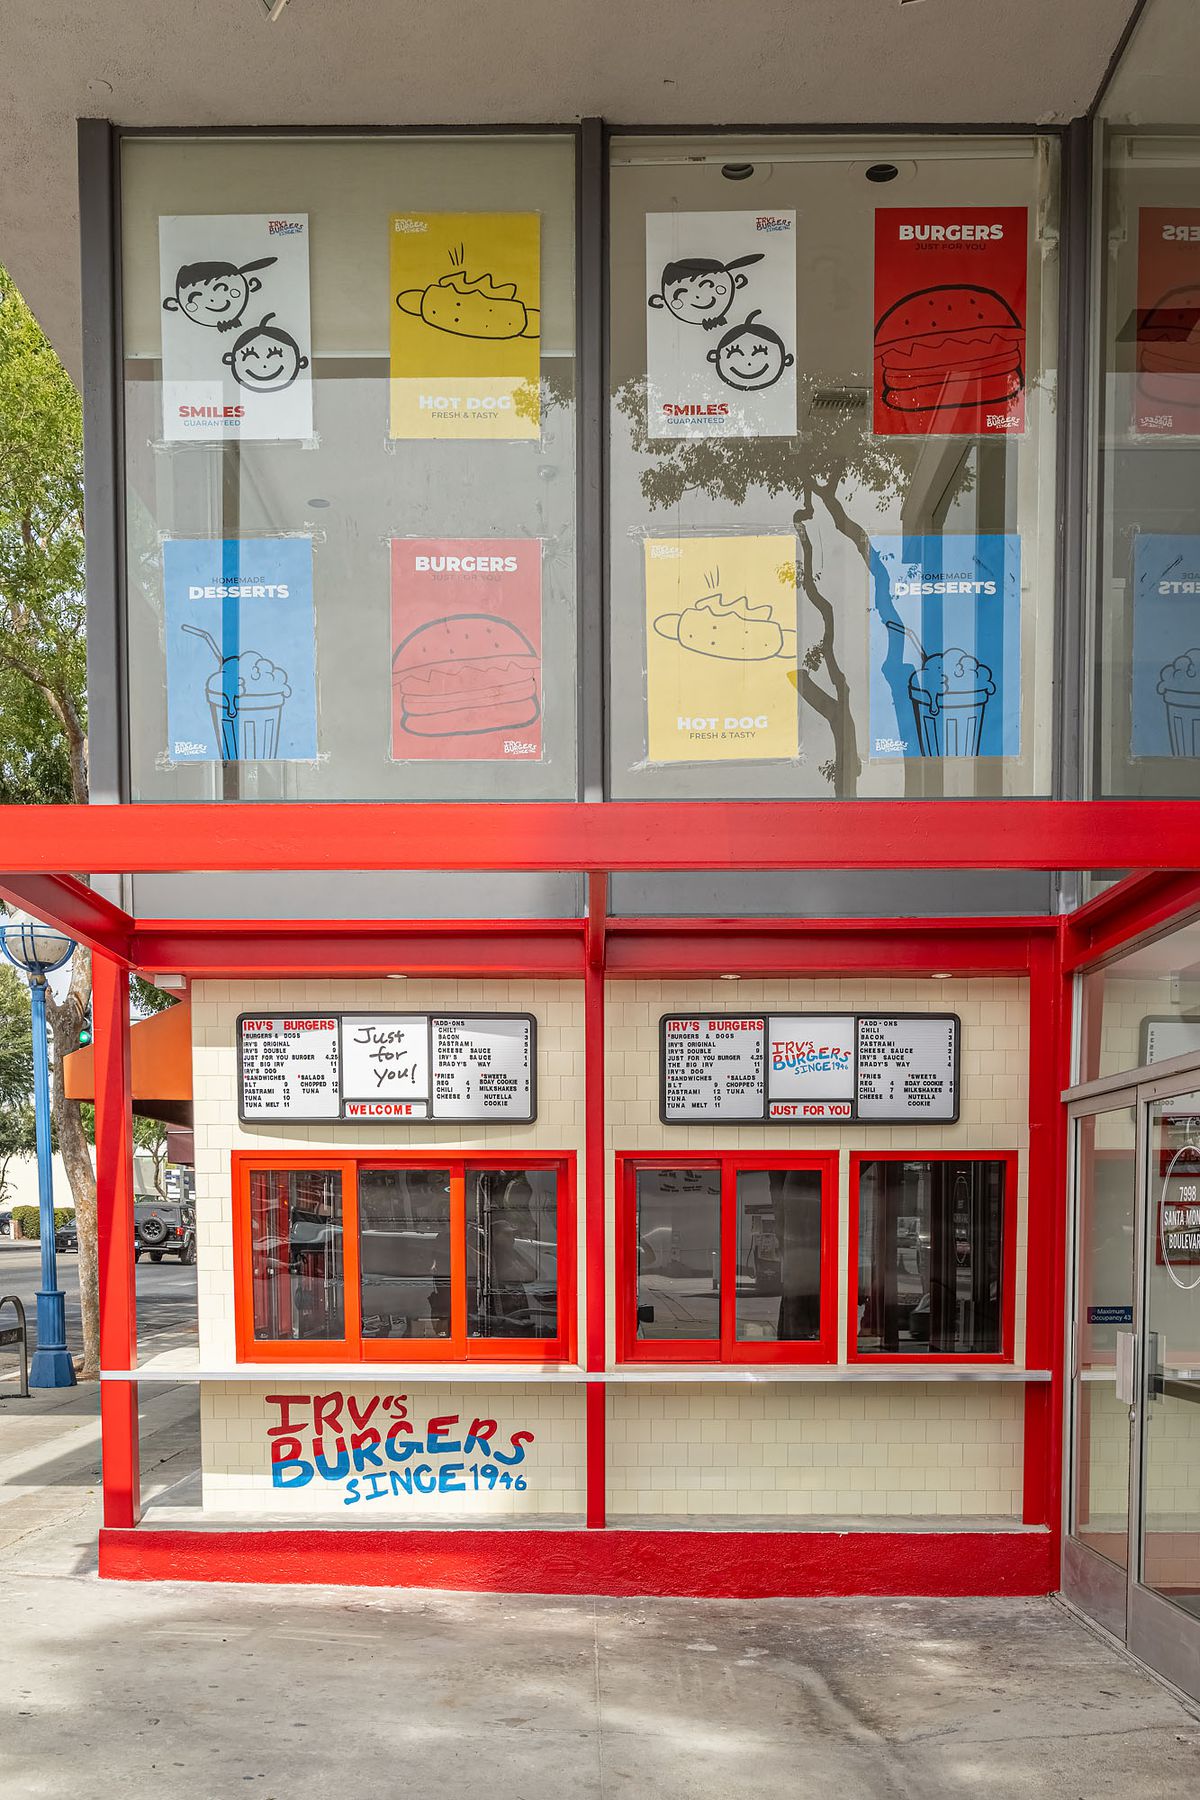 A face-on look at a walk-up restaurant with menus over the windows.